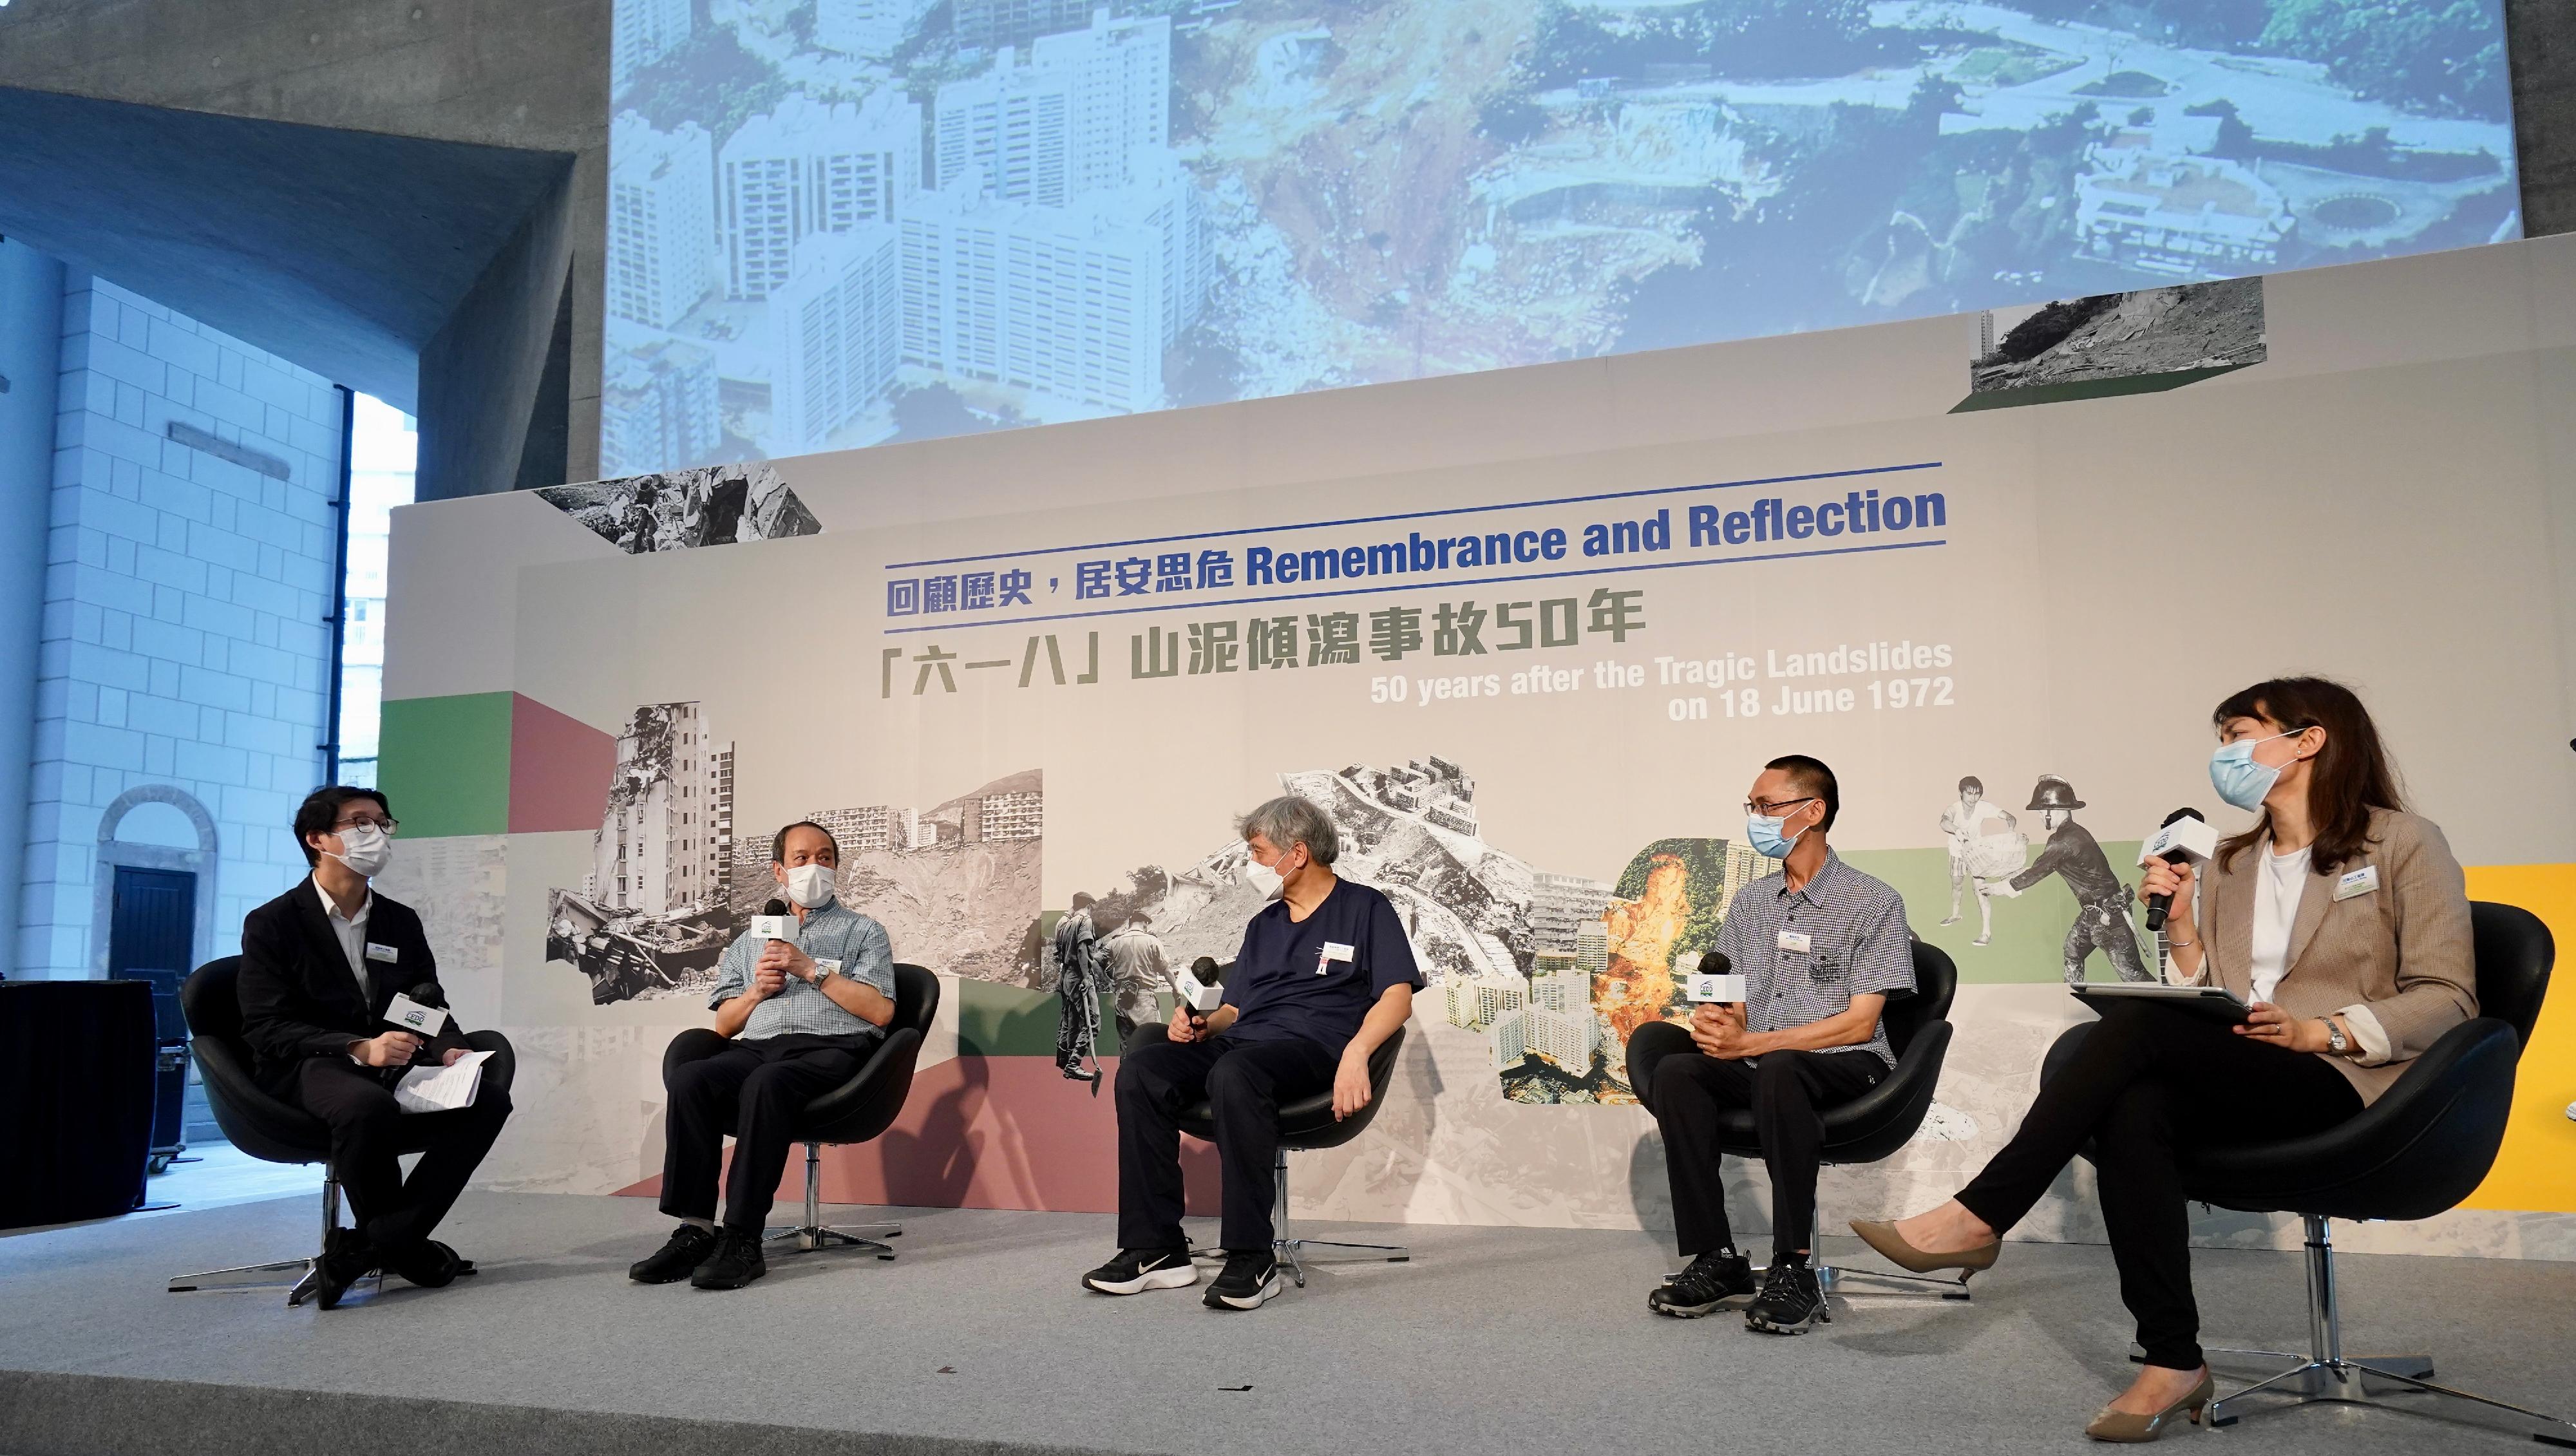 The Geotechnical Engineering Office (GEO) of the Civil Engineering and Development Department today (June 3) held the launch ceremony of the commemorative campaign Remembrance and Reflection: 50 years after the Tragic Landslides on 18 June 1972 at Tai Kwun. Photo shows the three guest speakers and representatives of the GEO sharing about the disastrous landslides on June 18, 1972 at the ceremony.